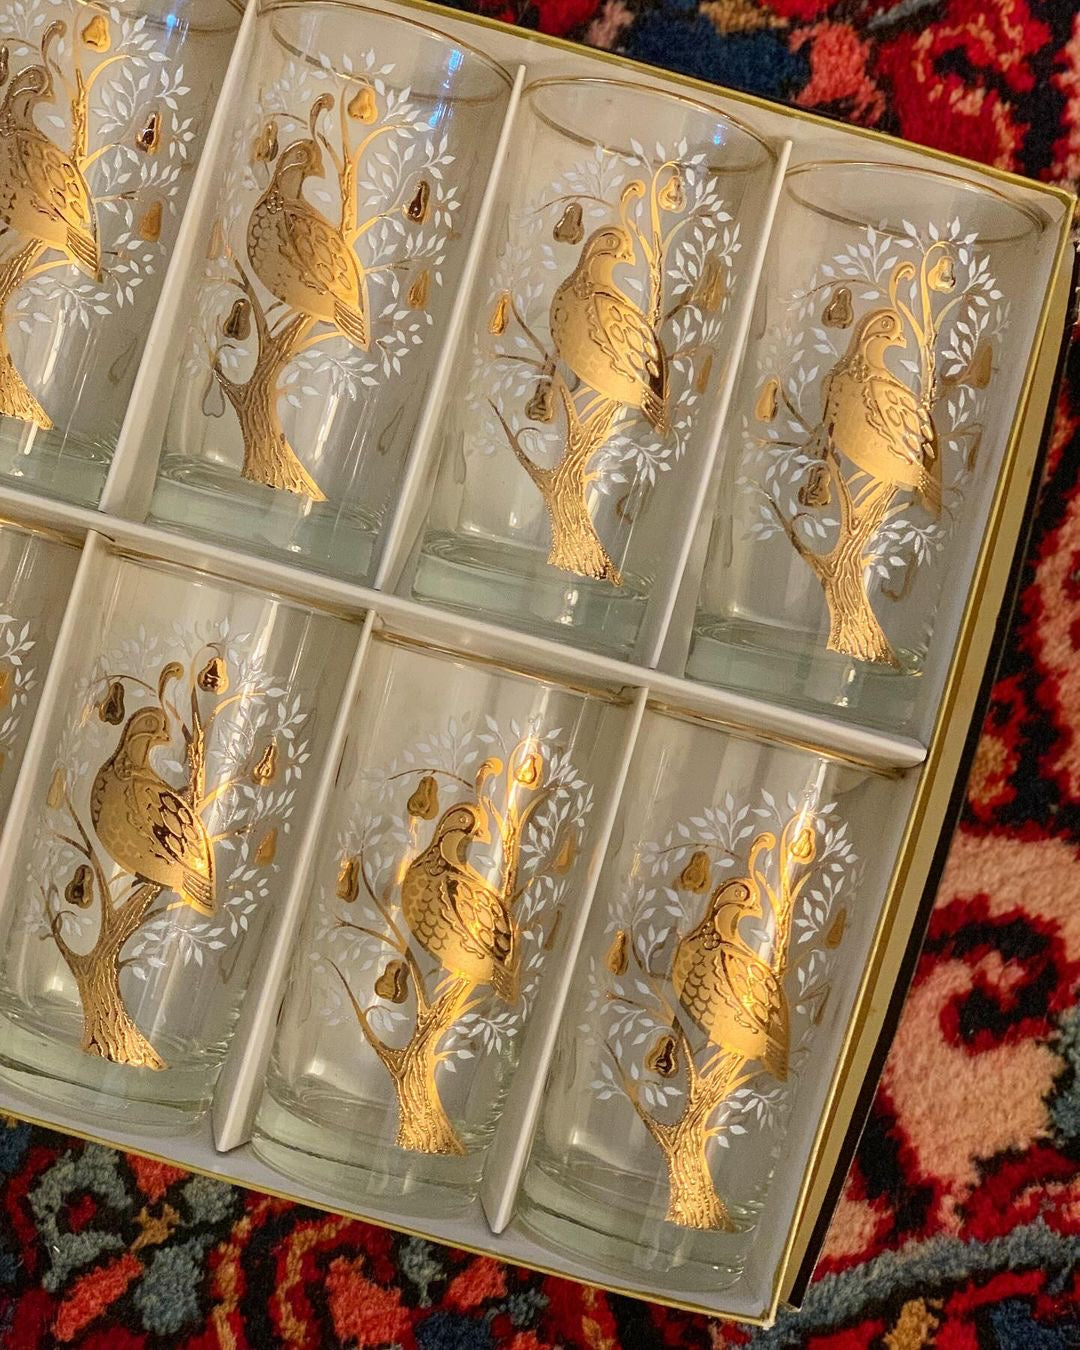 22K 'A Partridge in a Pear Tree' Highball Glasses, Set of 8 (1960)